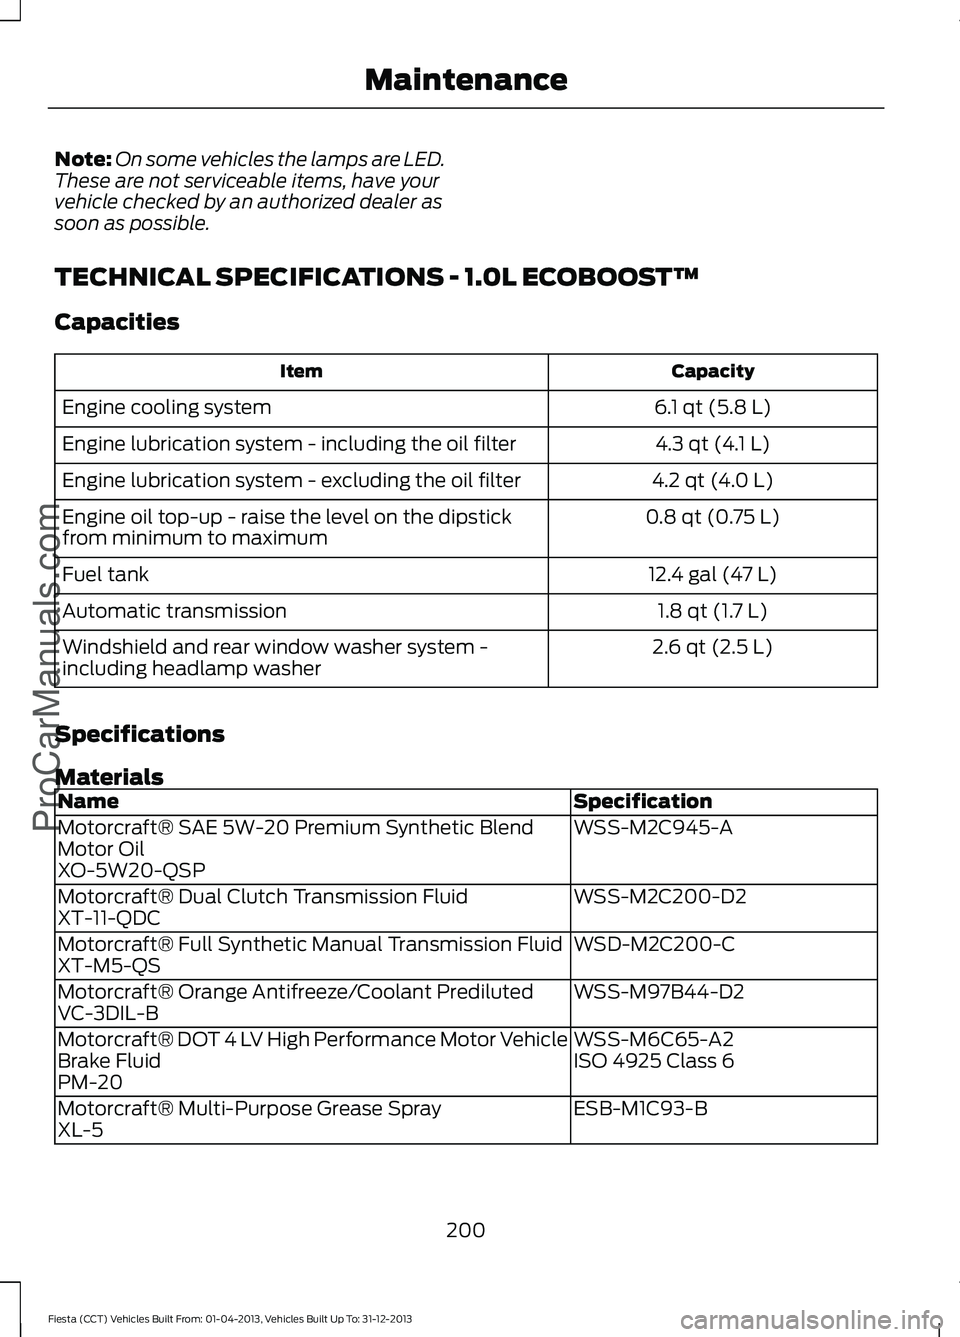 FORD FIESTA 2014  Owners Manual Note:
On some vehicles the lamps are LED.
These are not serviceable items, have your
vehicle checked by an authorized dealer as
soon as possible.
TECHNICAL SPECIFICATIONS - 1.0L ECOBOOST™
Capacities